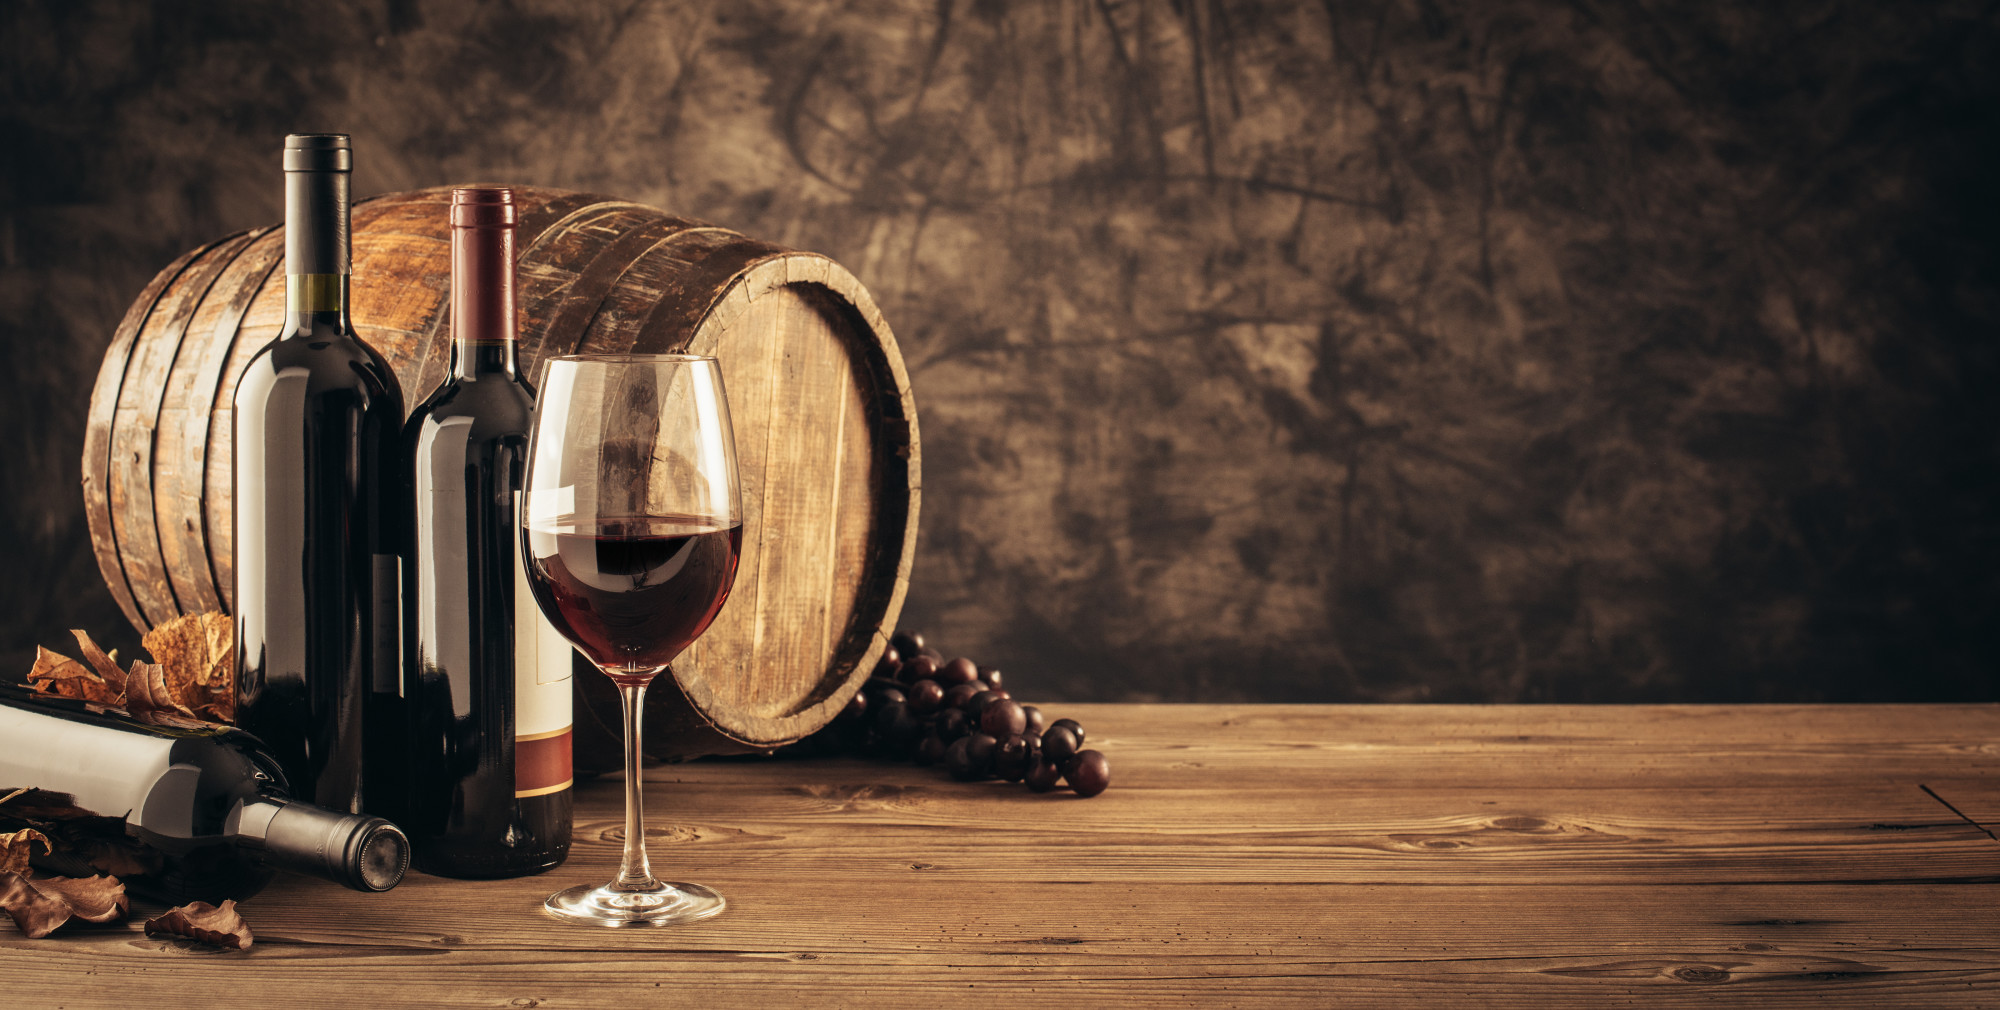 Wine vs Beer: Which Is Healthier?